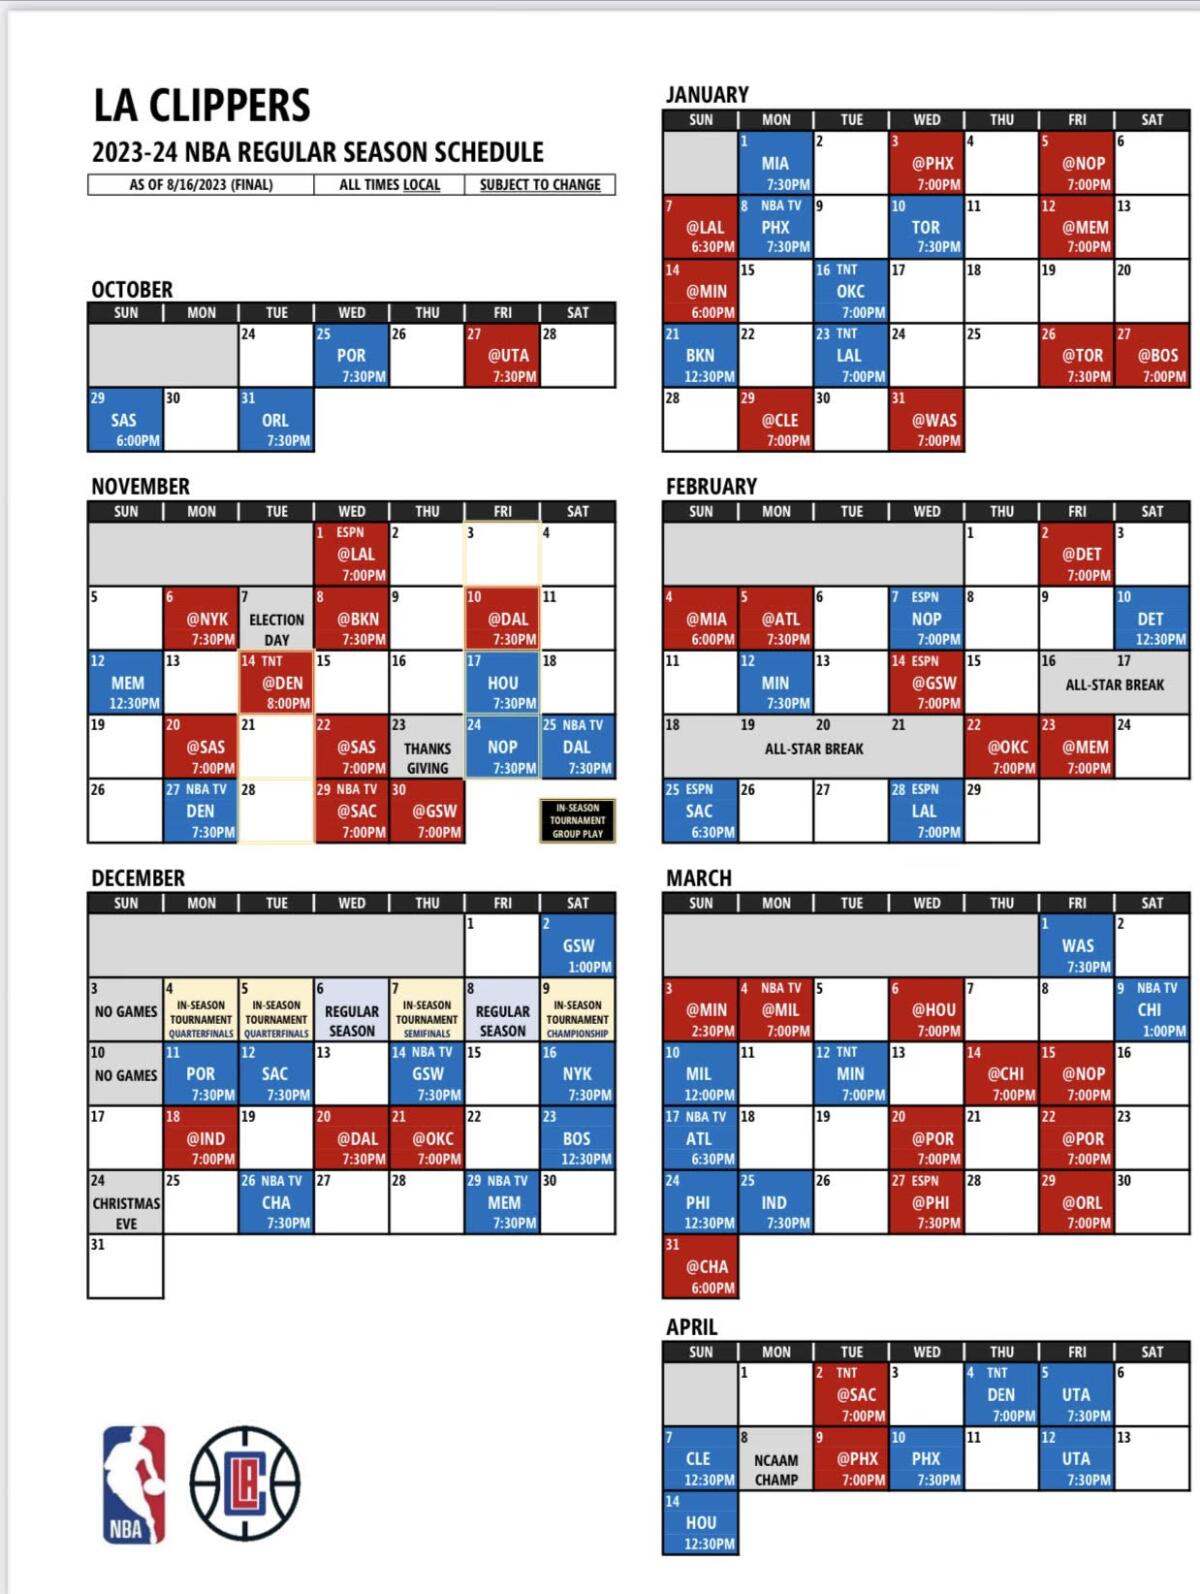 The Clippers' 2023-2024 schedule.